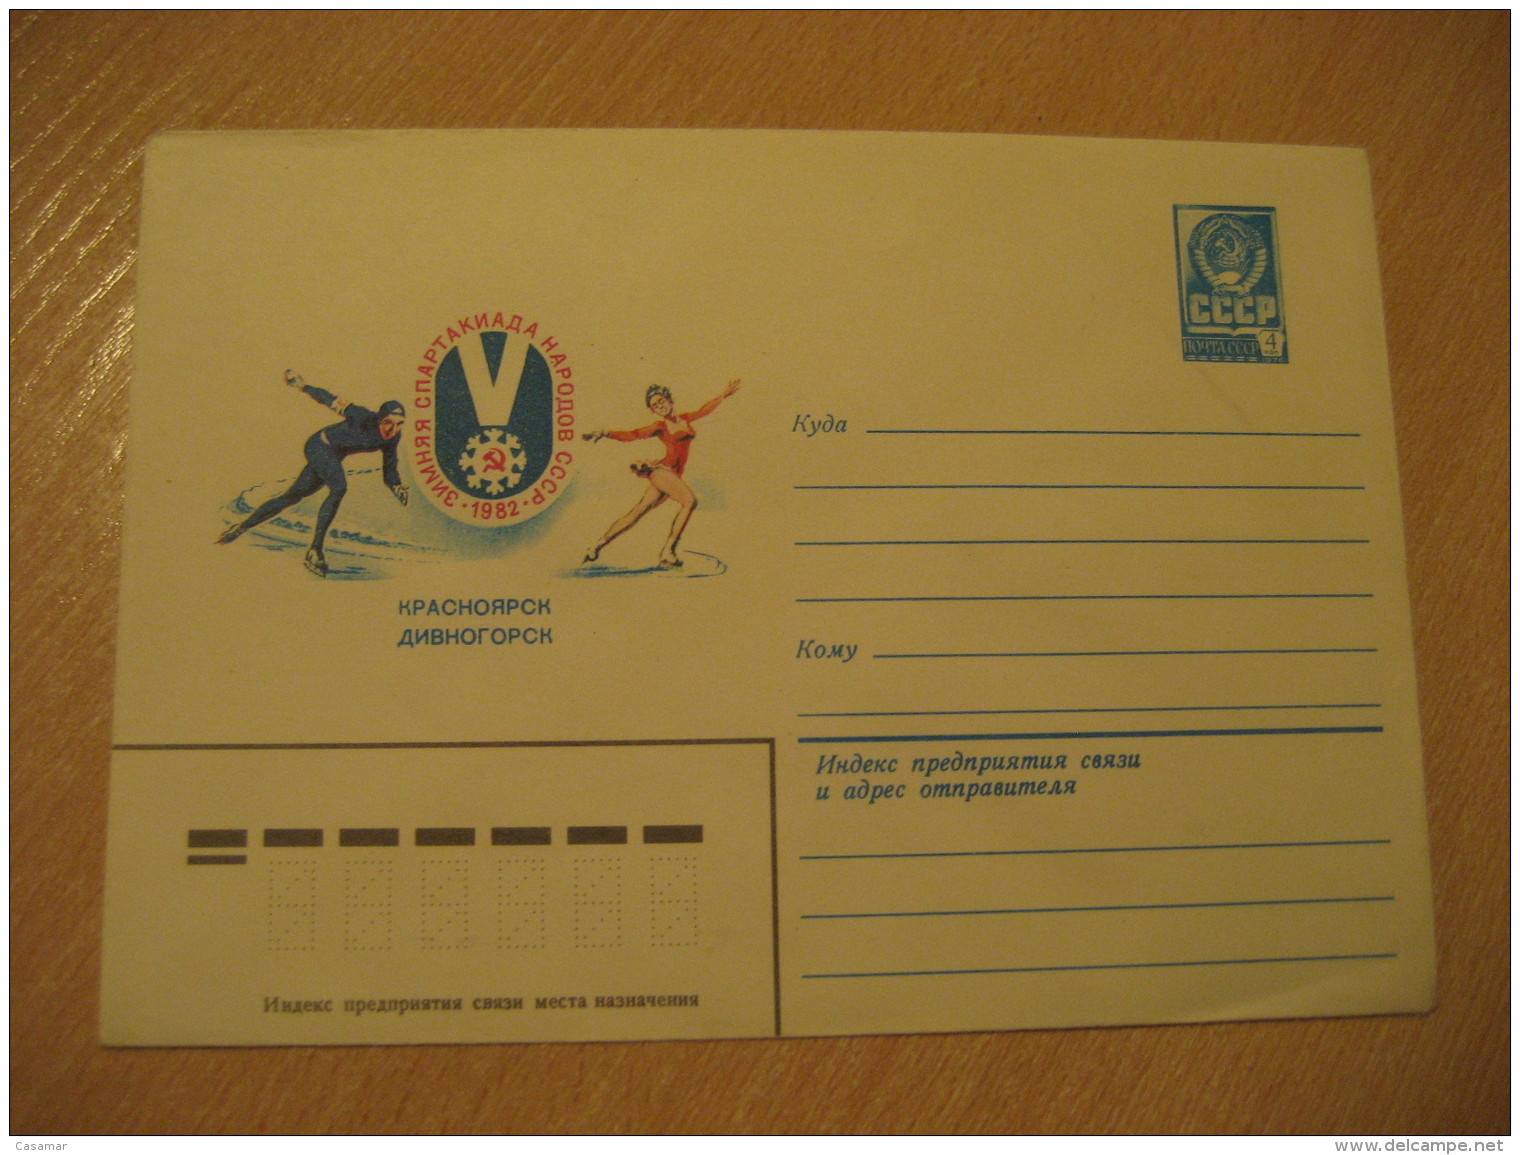 RUSSIA 1982 Speed &amp; Figure Skating On Ice Patinage De Vitesse &amp; Artistique Sur Glace Postal Stationery Cover USS - Figure Skating